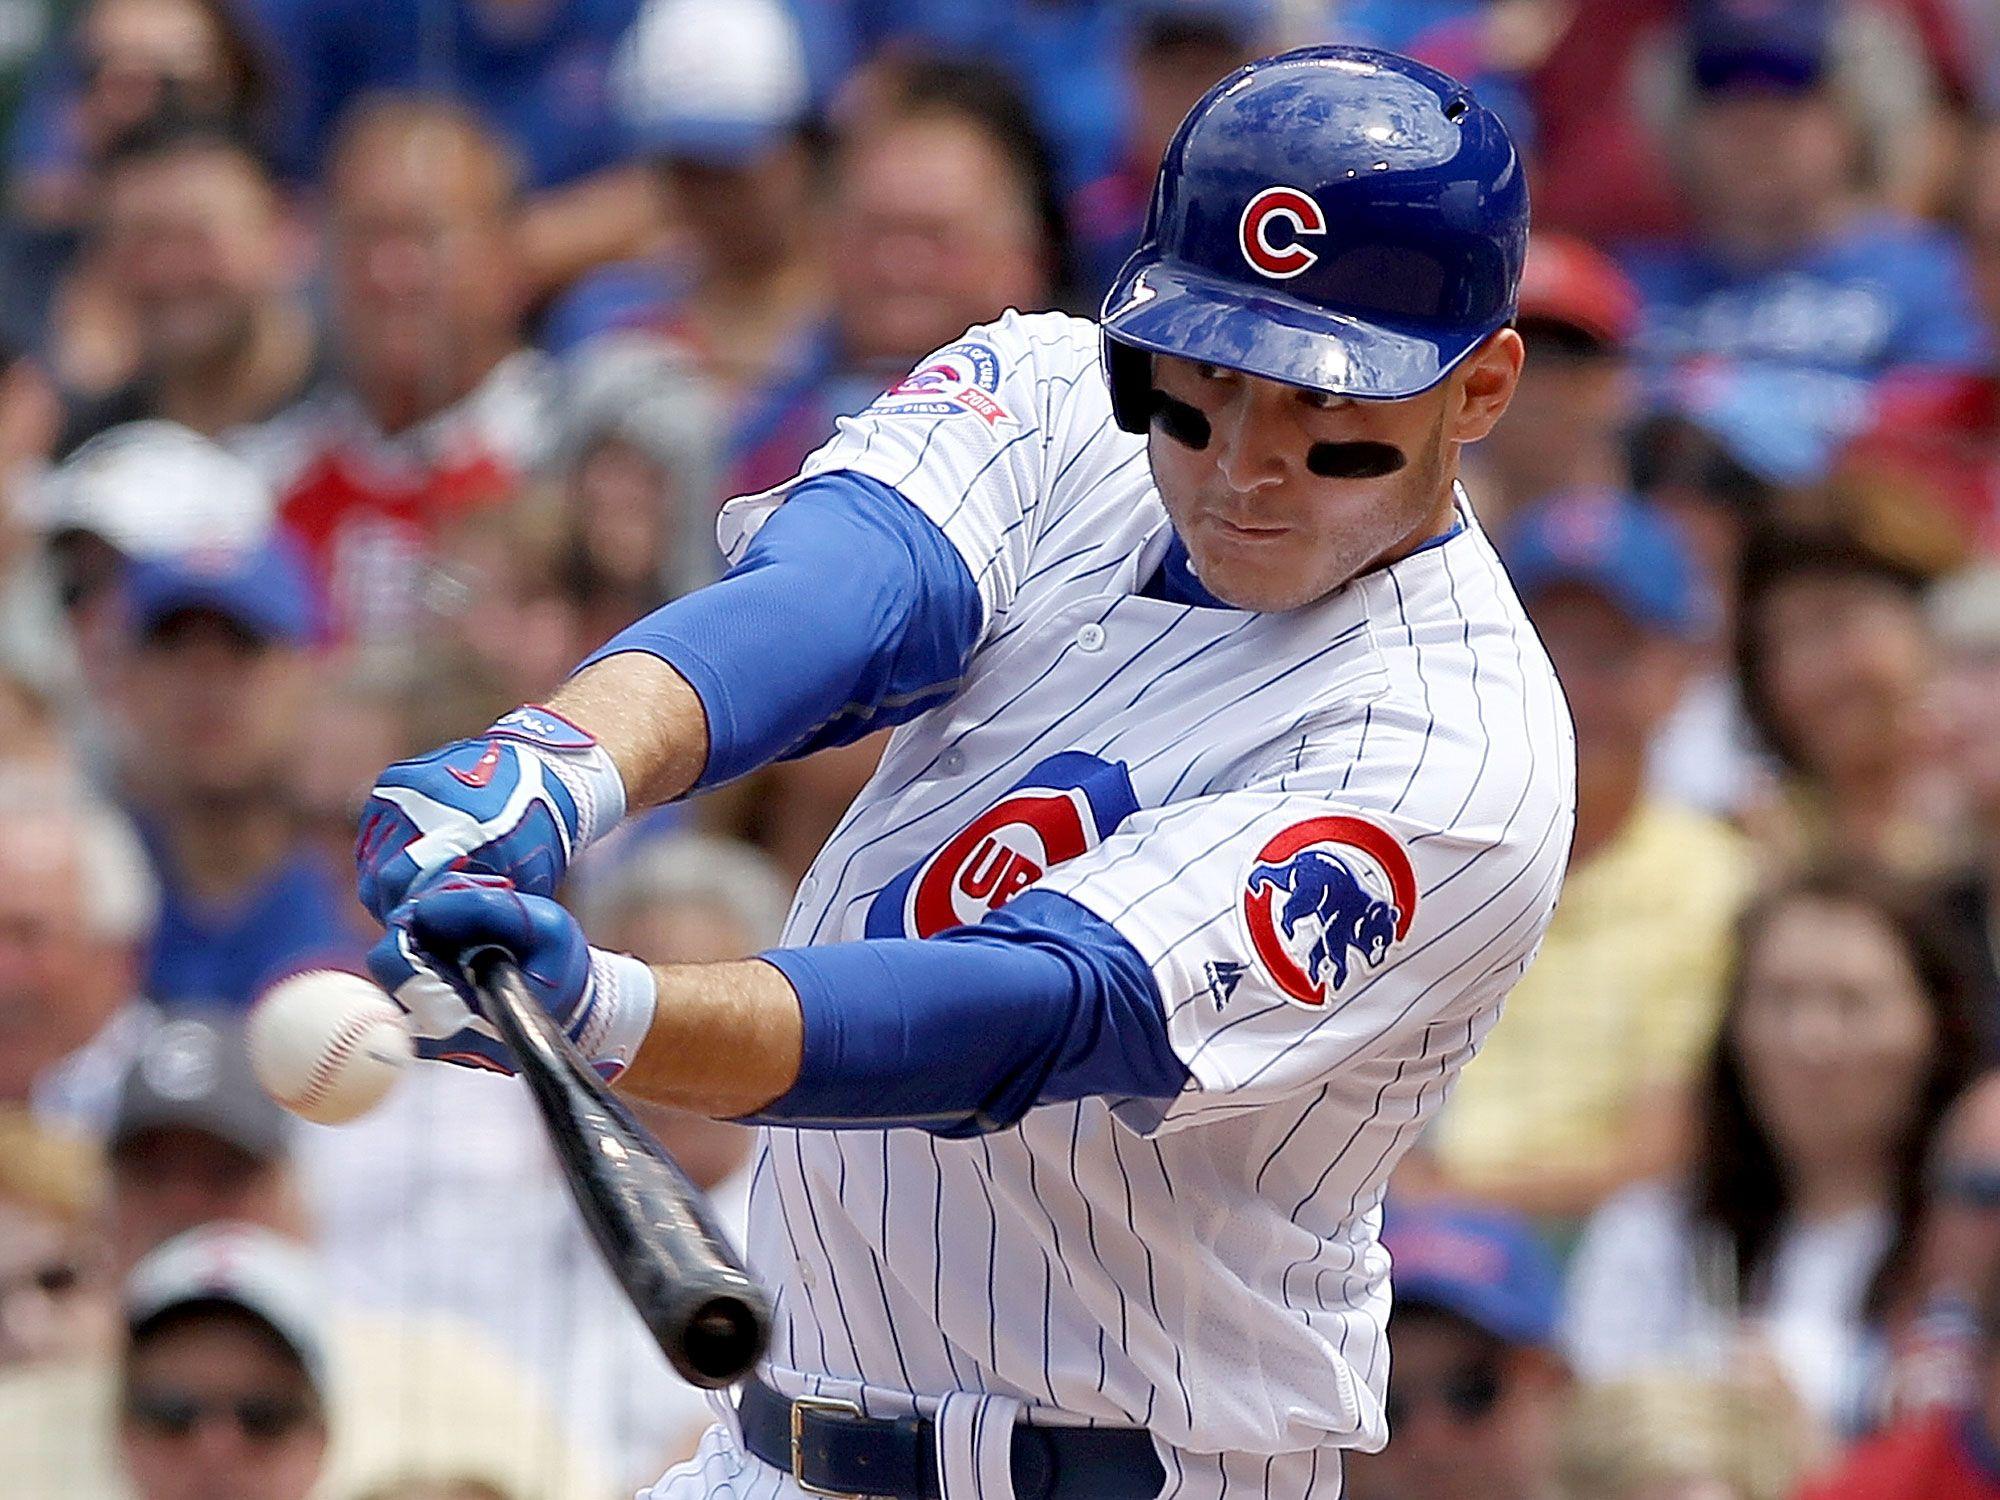 Cubs' Anthony Rizzo: Cancer survivor and heart of the team.